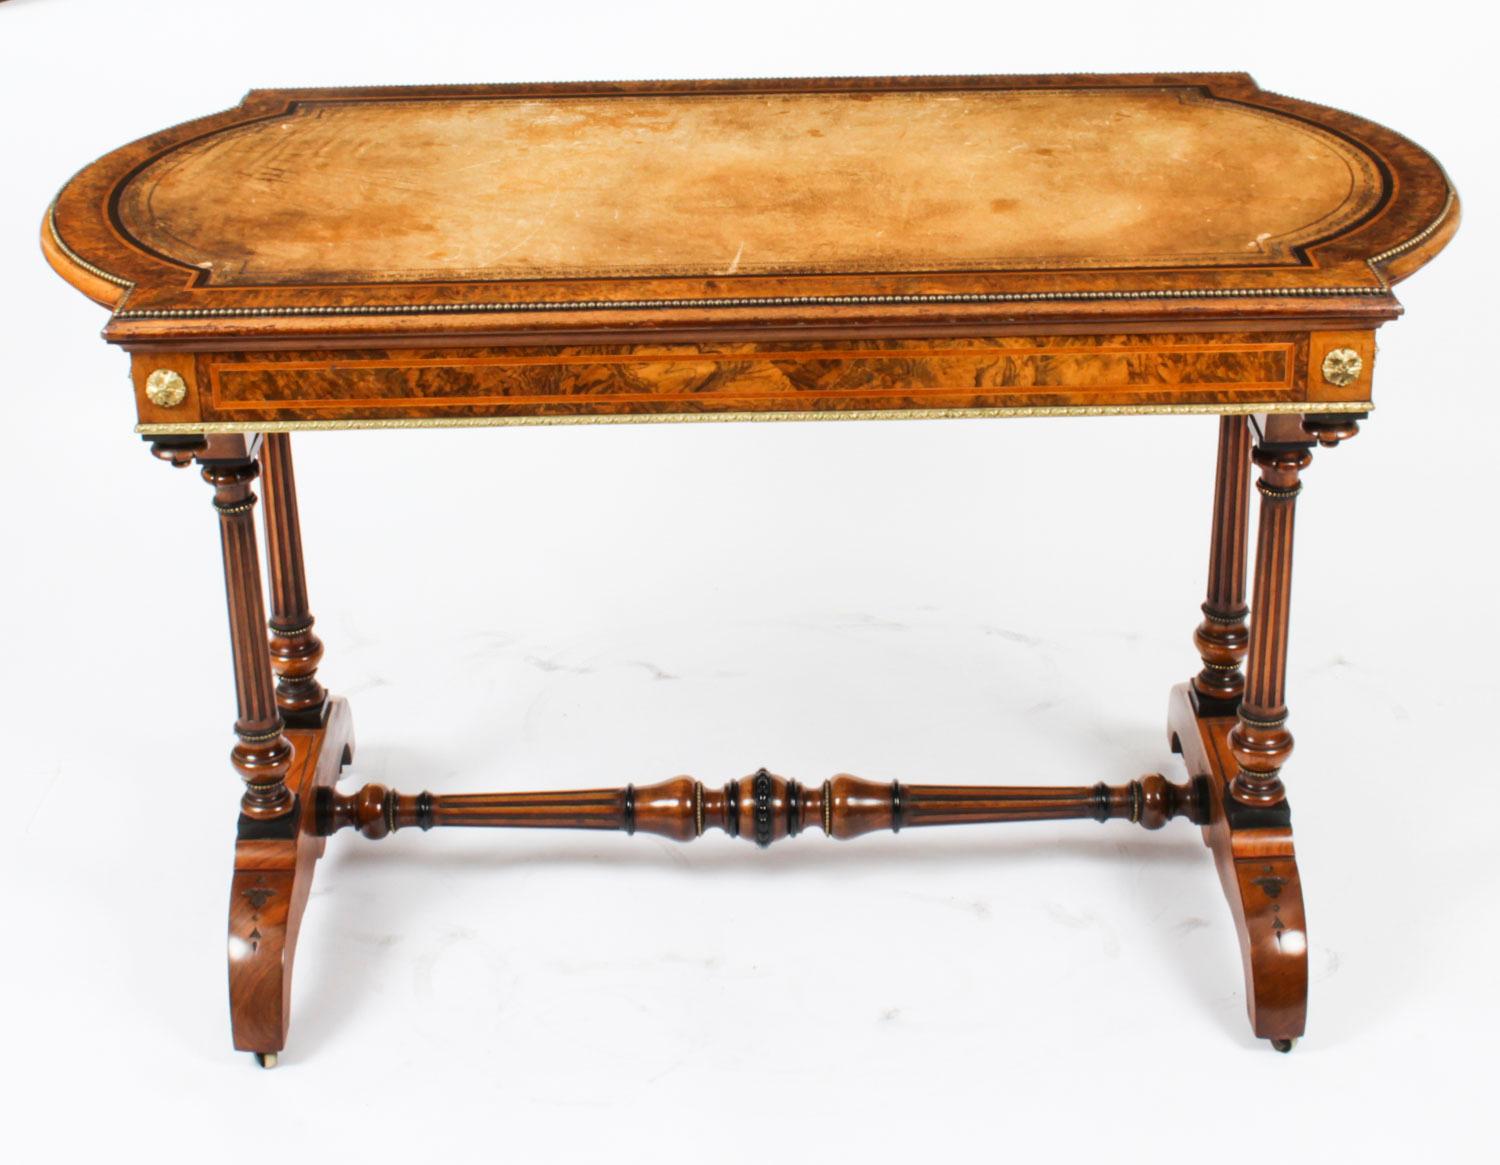 This is an elegant antique Victorian ormolu mounted burr walnut writing table attributed to the renowned cabinet makers Holland & Sons, Circa 1870 in date.

This gorgeous desk is crafted from the most beautiful burr walnut inlaid with crossbanded